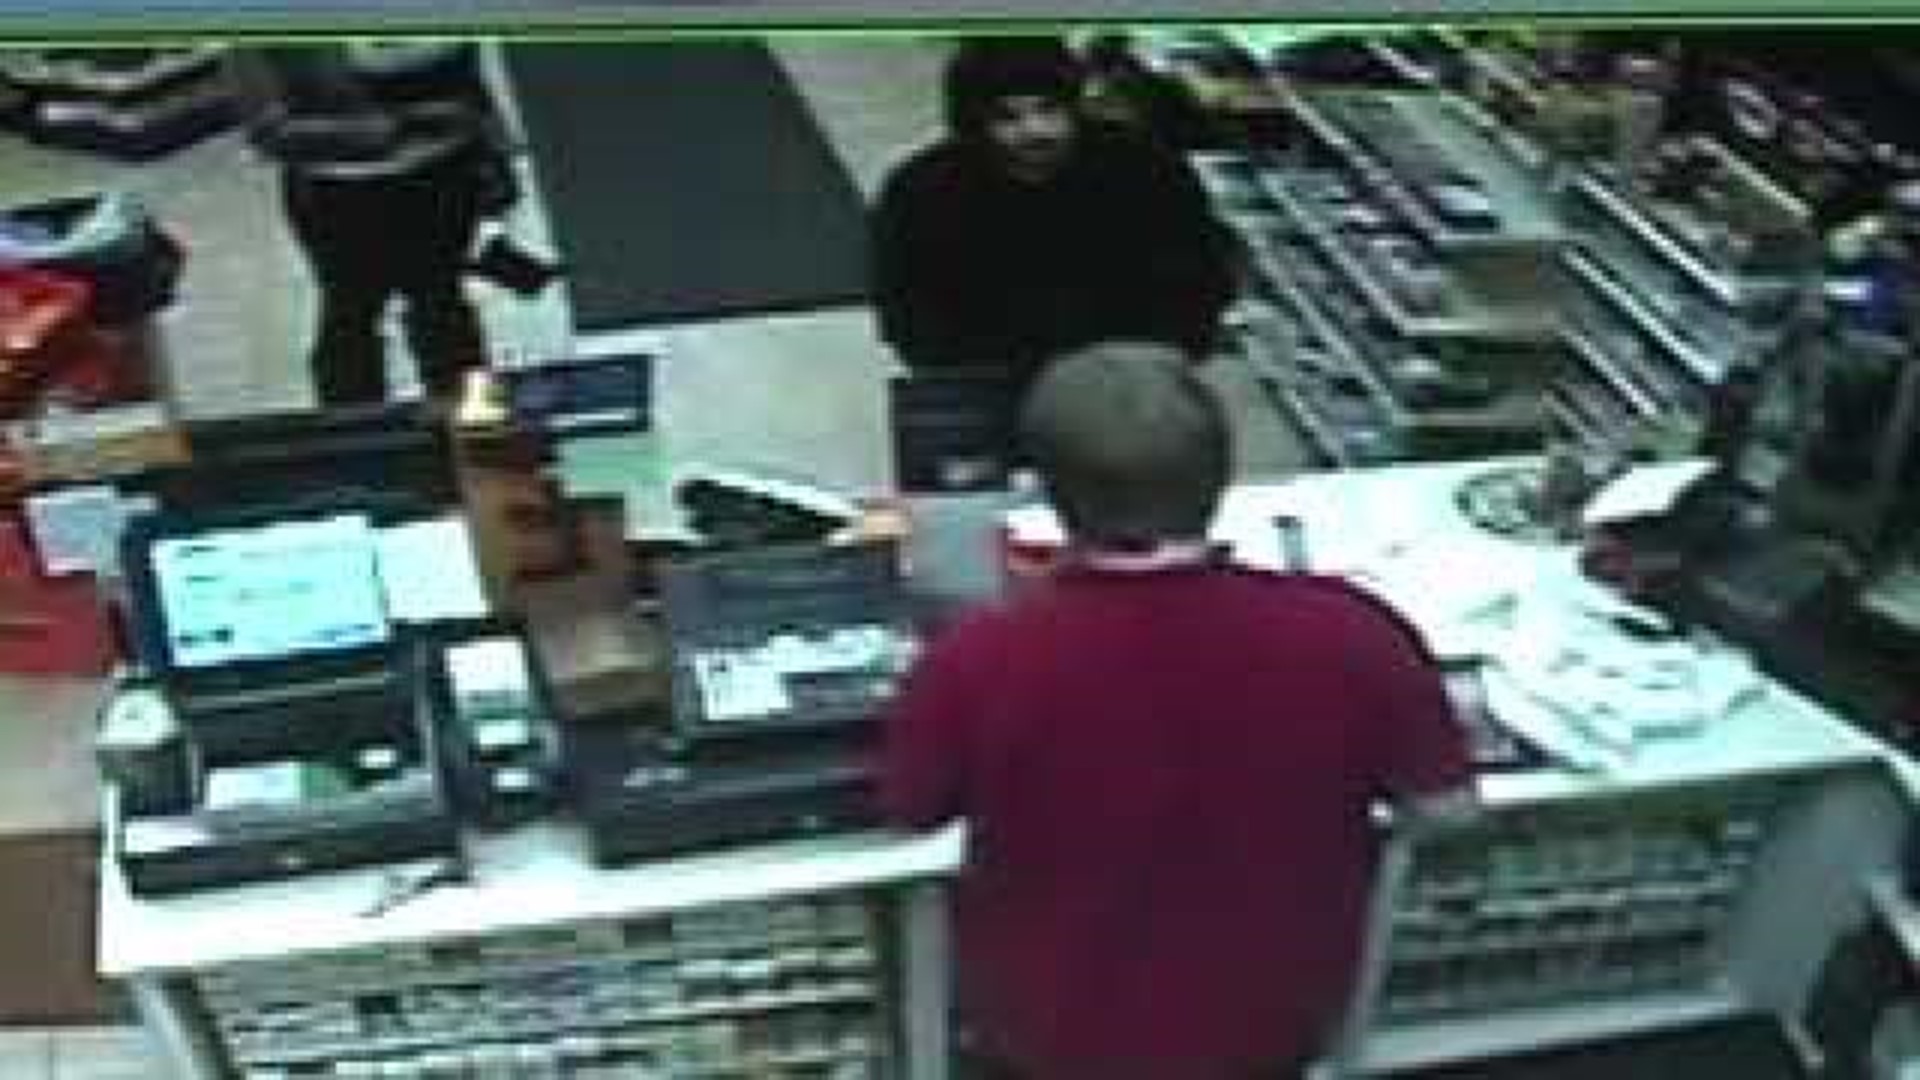 The Search is on for a Thief in Luzerne County